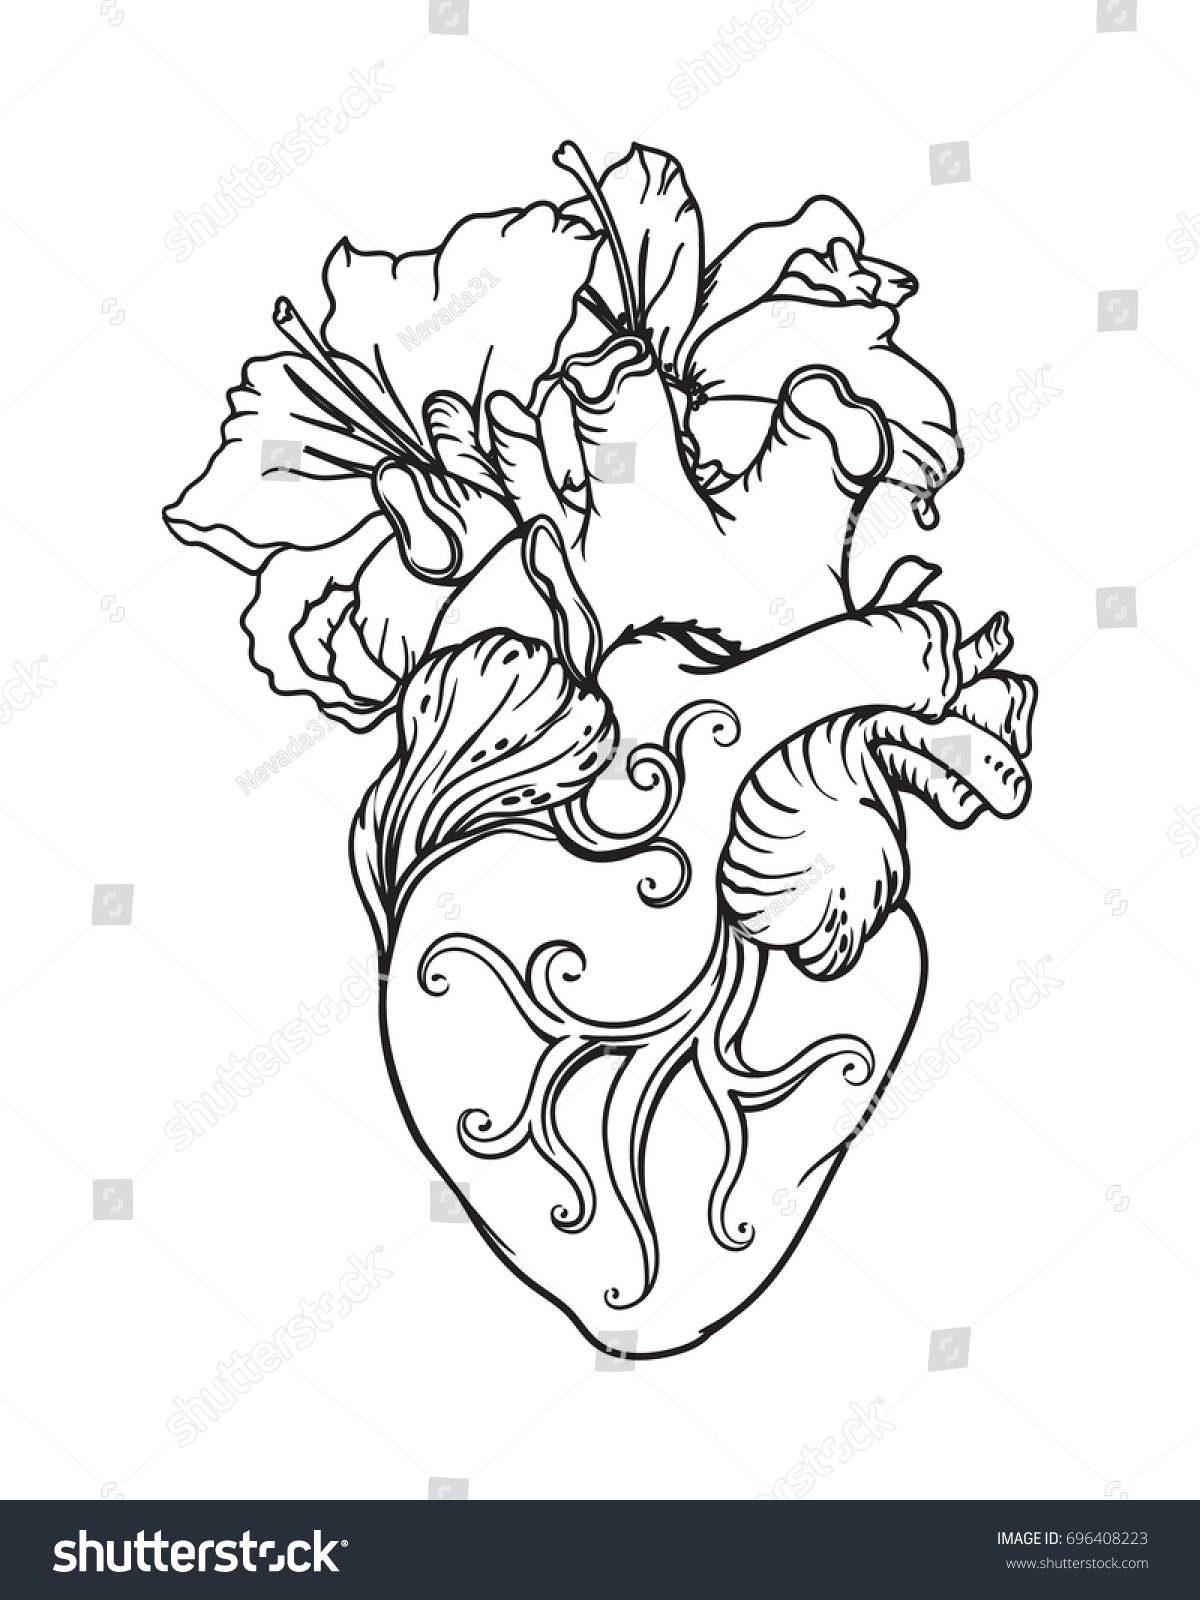 Stylized Anatomical  Human Heart  Drawing Heart  Stock Vector 